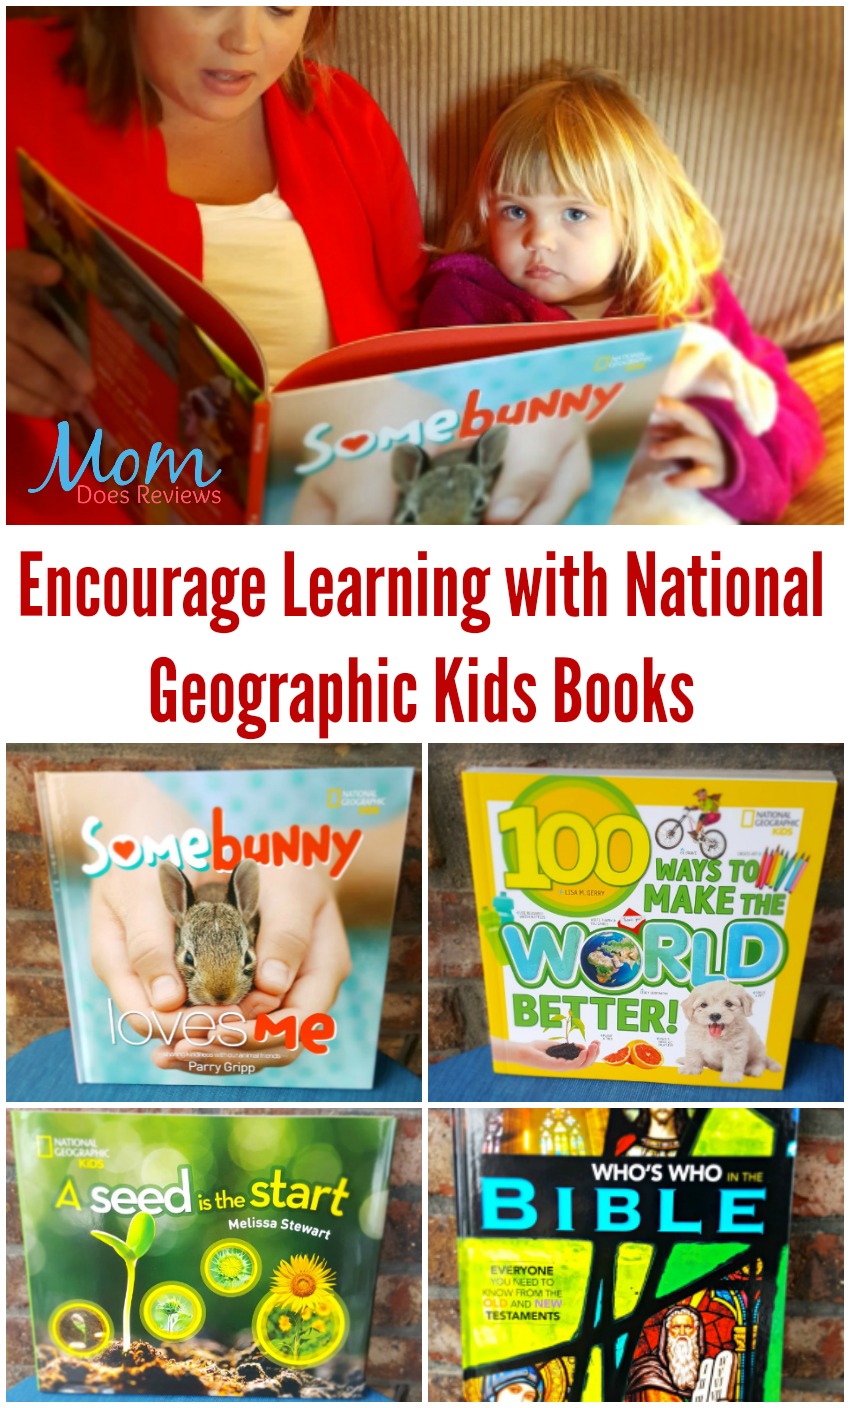 Encourage Learning with National Geographic Kids Books